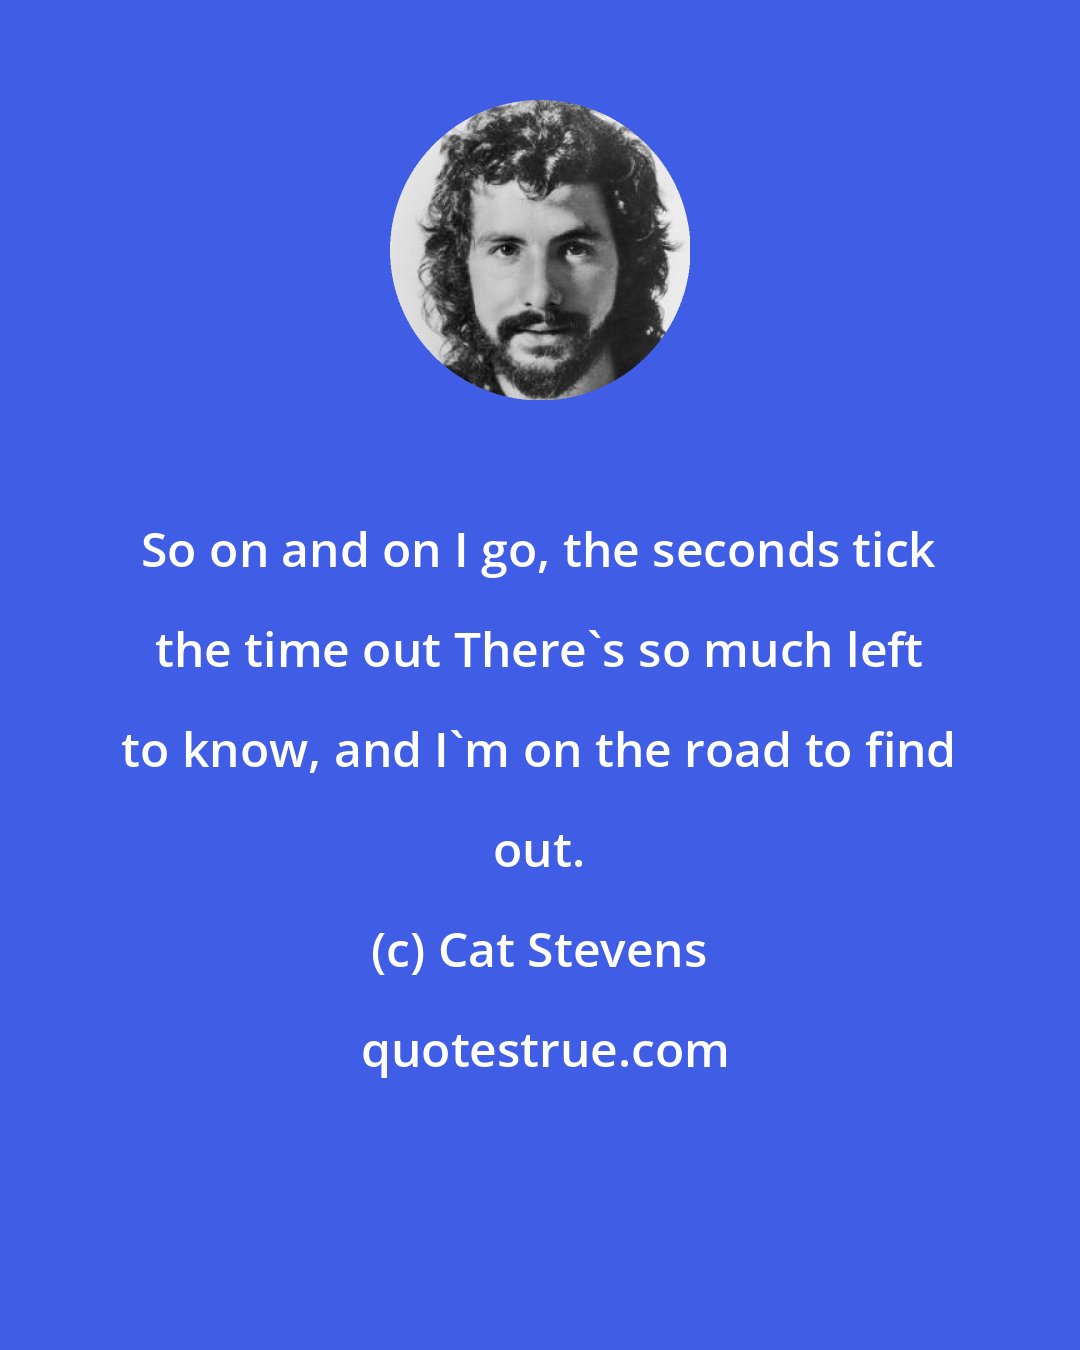 Cat Stevens: So on and on I go, the seconds tick the time out There's so much left to know, and I'm on the road to find out.